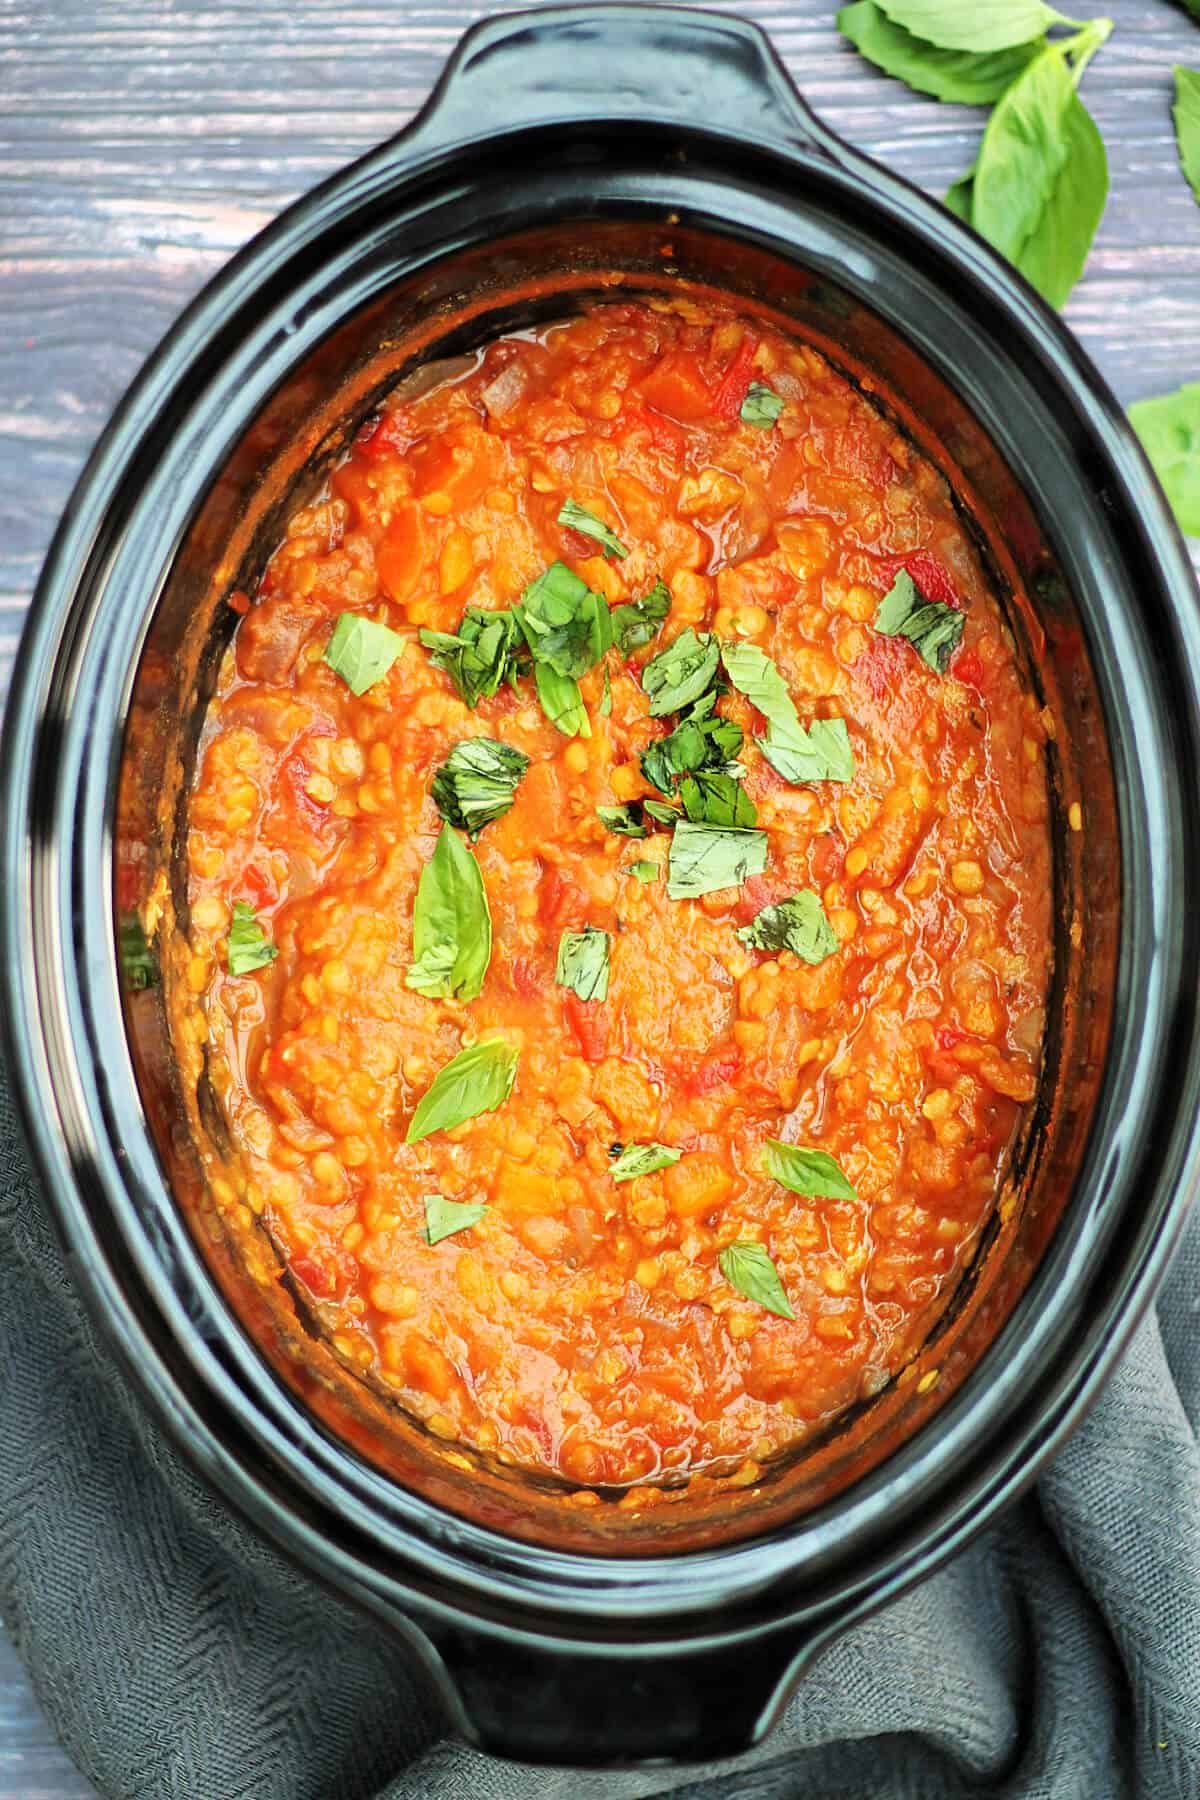 Slow cooker inner pot with red lentil pasta sauce.